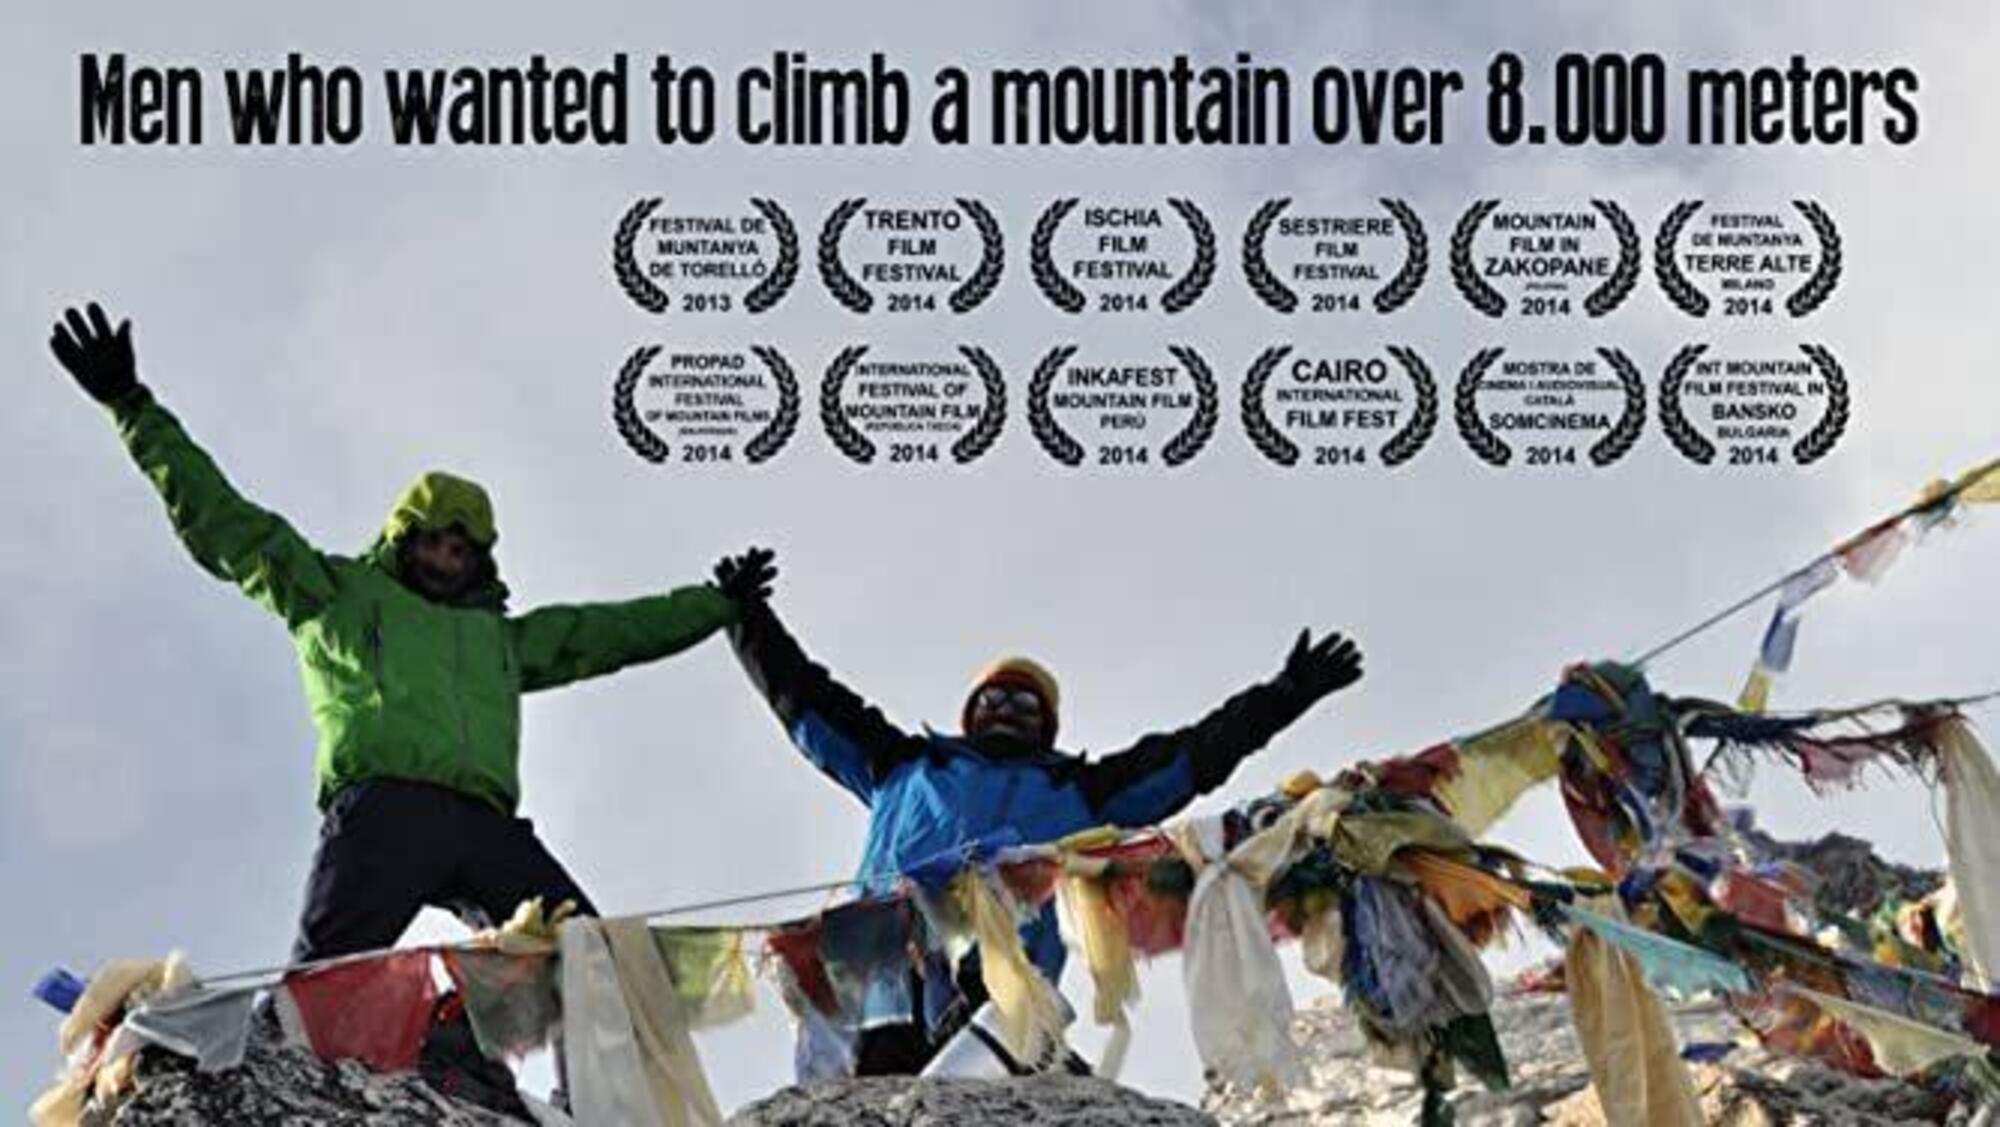 Men who wanted to climb a mountain over 8000 meters (Pere Herms, 2013)